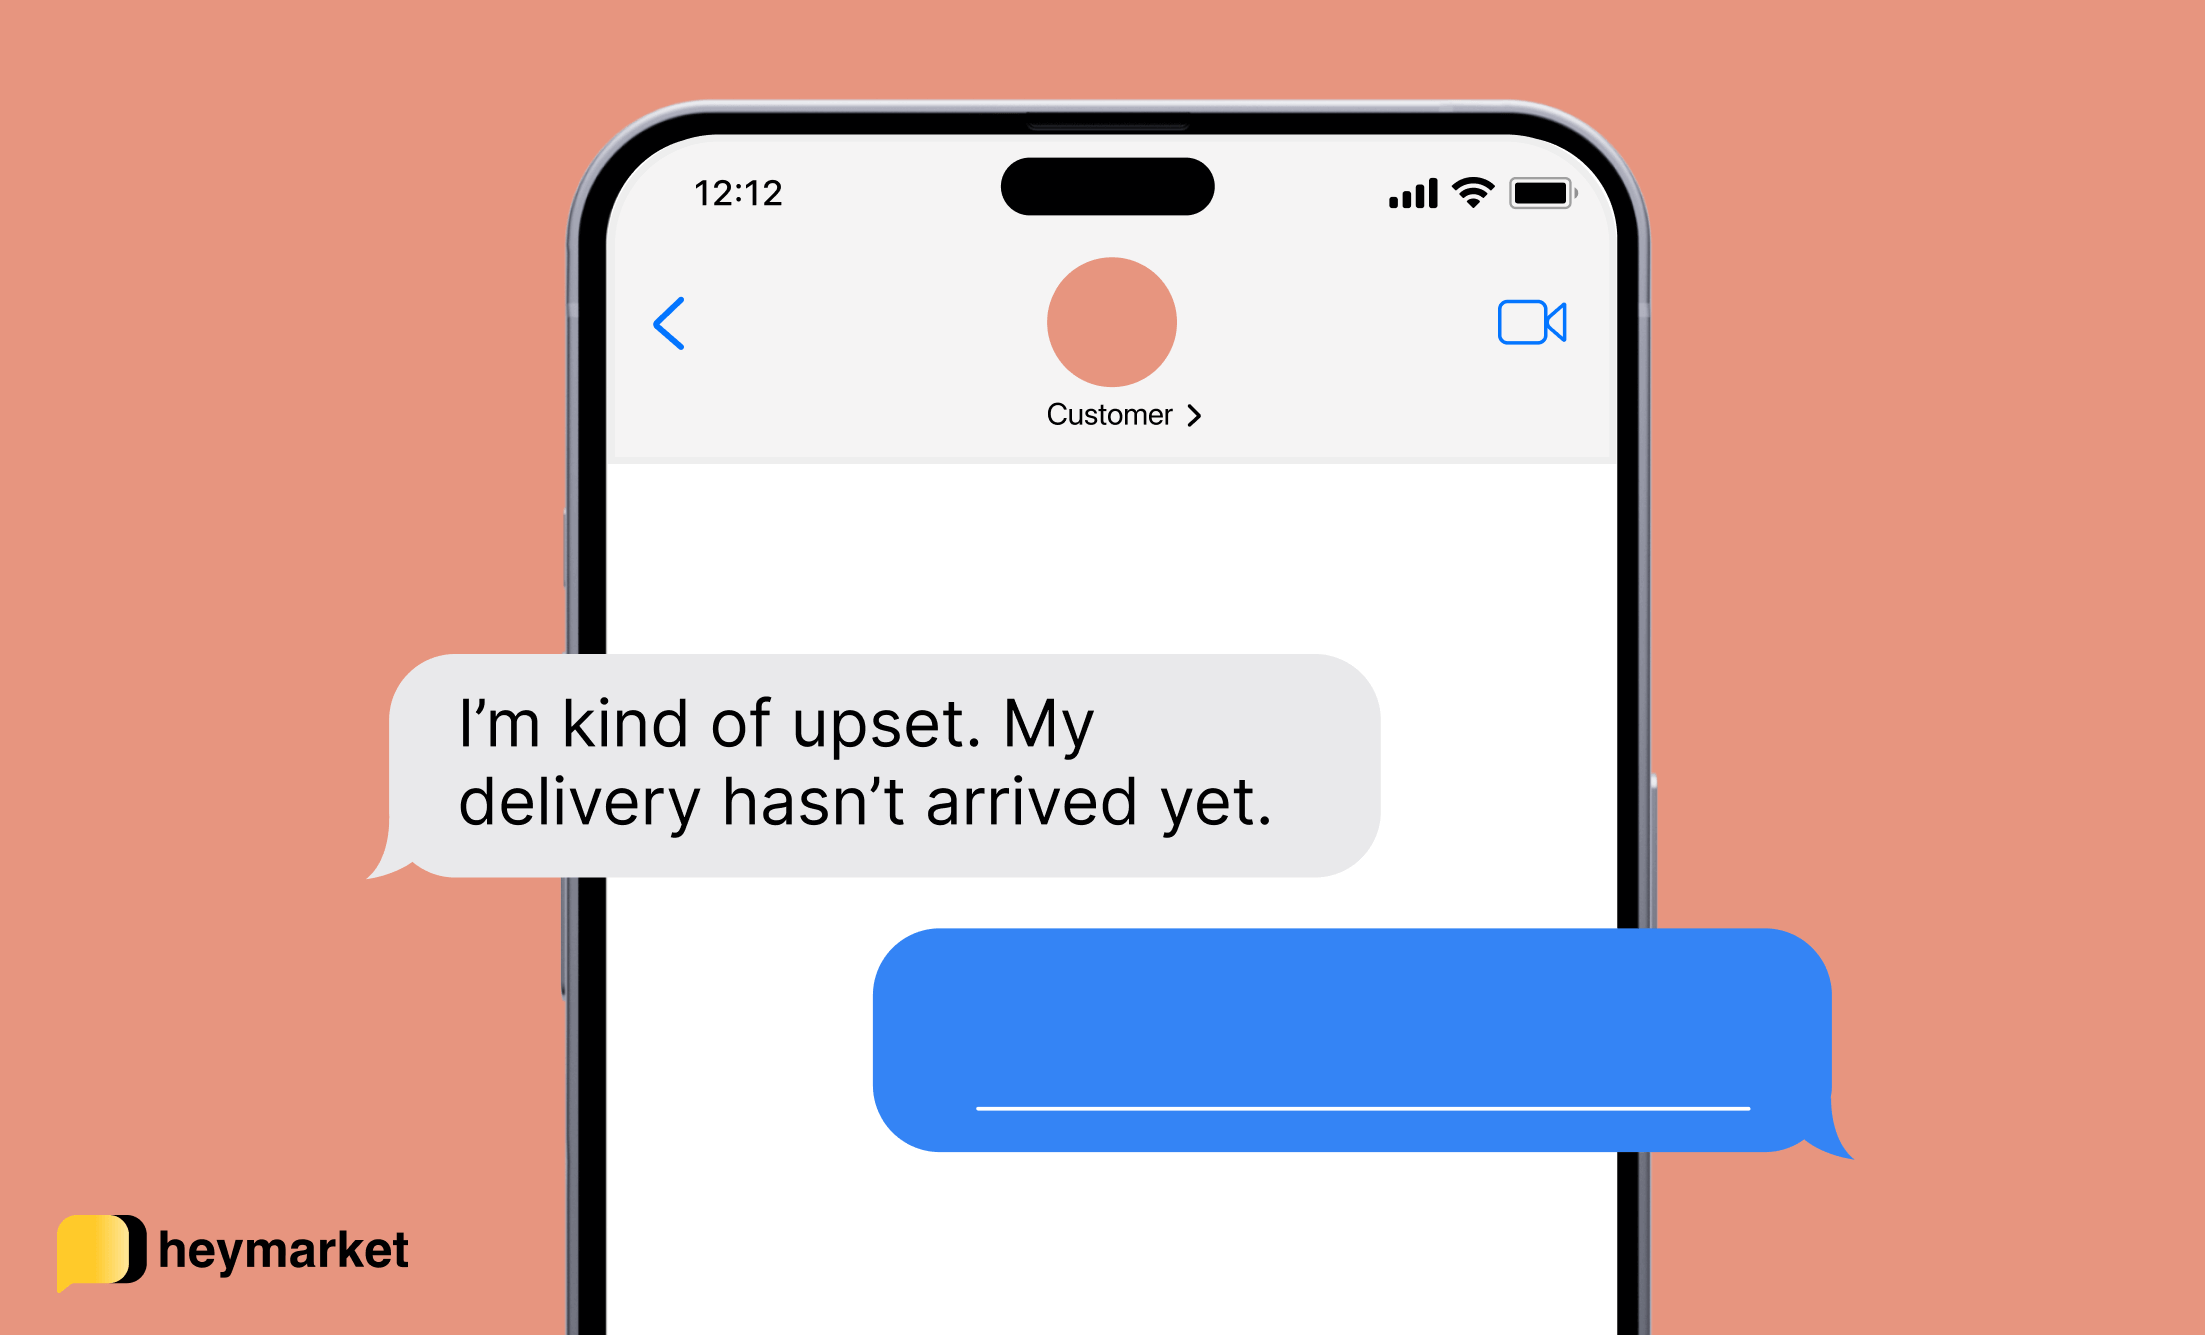 Text message conversation used in a customer service training class: Customer: I’m kind of upset. My delivery hasn’t arrived yet. Agent: (fill in the blank)